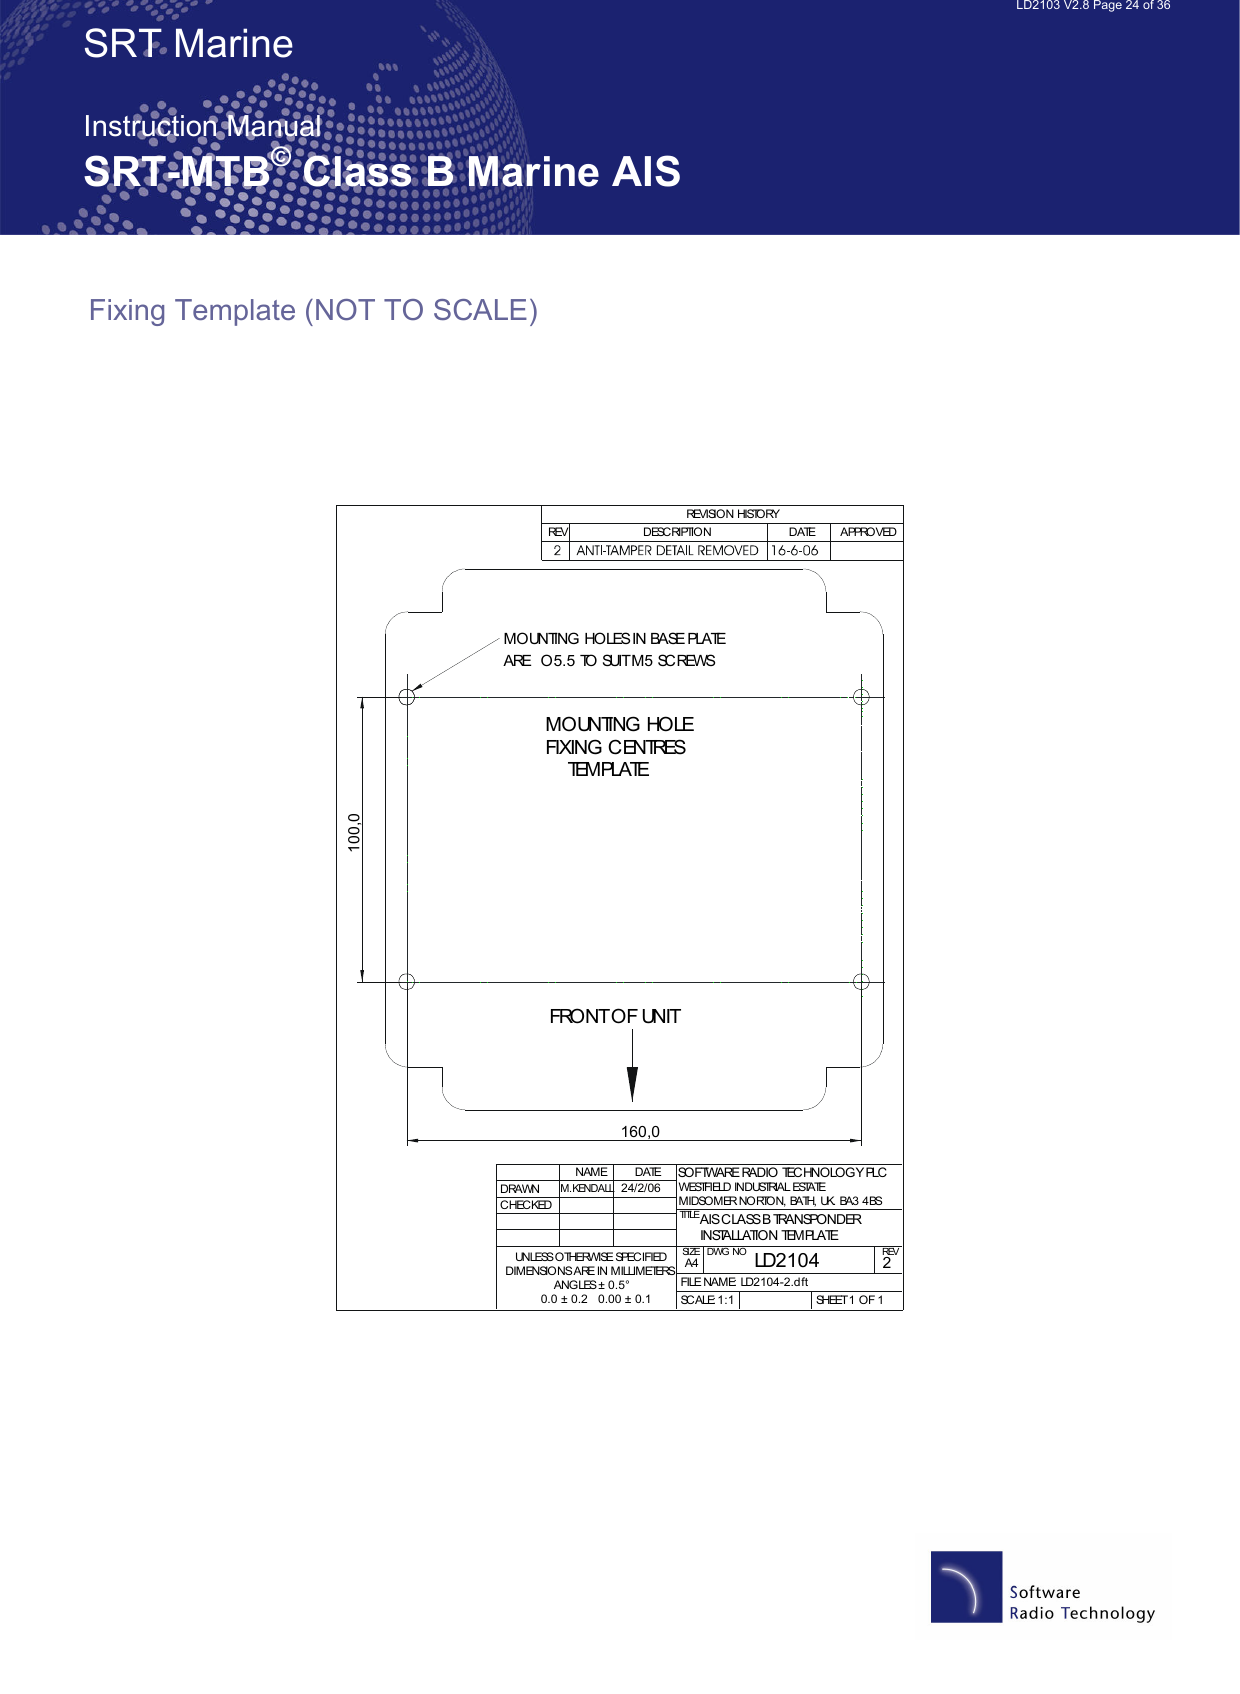   LD2103 V2.8 Page 24 of 36 SRT Marine  Instruction Manual SRT-MTB© Class B Marine AIS Fixing Template (NOT TO SCALE)    MOUNTING HOLE FIXING CENTRES    TEMPLATEMOUNTING HOLES IN BASE PLATE ARE  O5.5 TO SUIT M5 SCREWSFRONT OF UNIT100,0160,0DRAWNCHECKEDNAMEM.KENDALLDATETITLESIZEA4DWG NO REVFILE NAME: LD2104-2.dftSCALE: SHEET 1 OF 1REVISION HISTORYREV DESCRIPTION DATE APPROVEDSOFTWARE RADIO TECHNOLOGY PLCWESTFIELD INDUSTRIAL ESTATEMIDSOMER NORTON, BATH, UK. BA3 4BSUNLESS OTHERWISE SPECIFIEDDIMENSIONS ARE IN MILLIMETERSANGLES ± 0.5°0.0 ± 0.2   0.00 ± 0.124/2/06LD21042AIS CLASS B TRANSPONDERINSTALLATION TEMPLATE1:1 